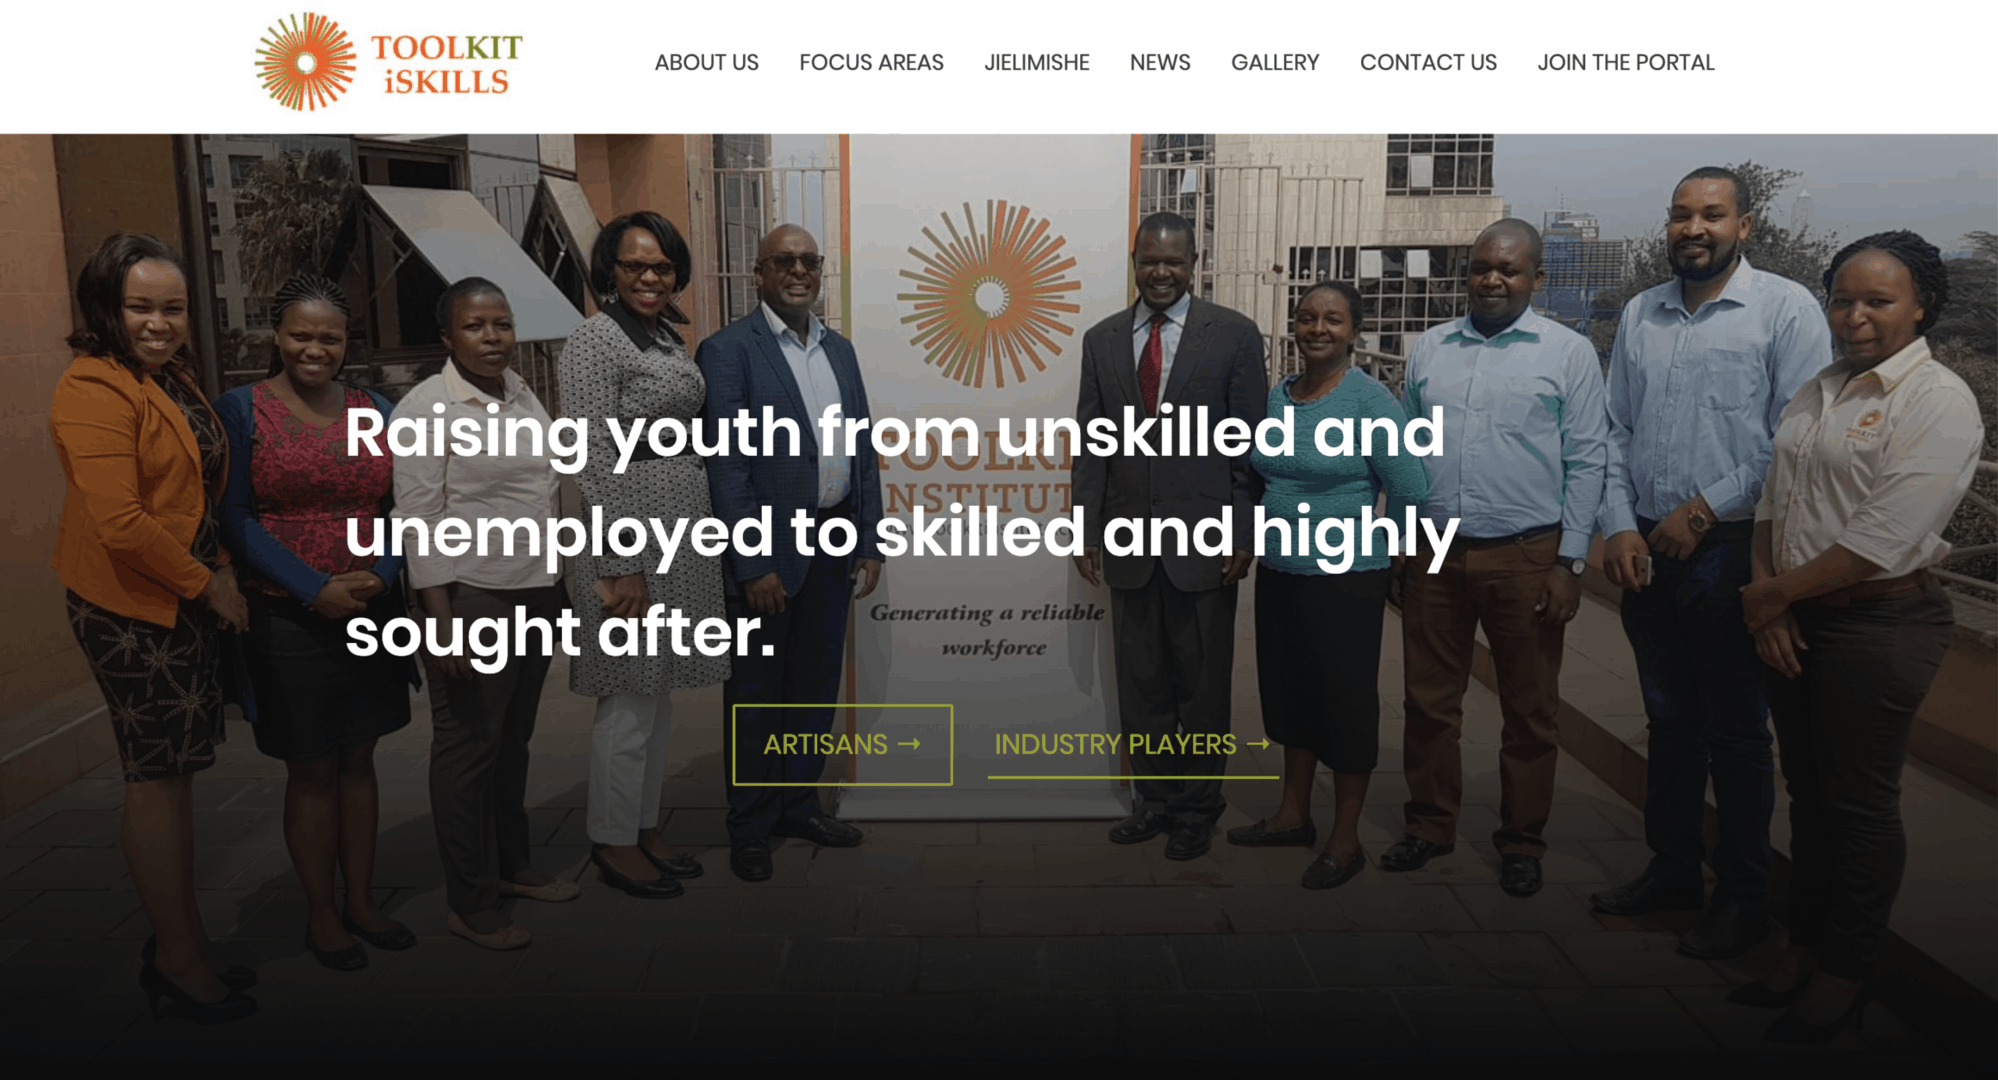 Toolkit iSkills homepage. Employees infront of Toolkit iSkills banner with words in white lettering overlaid stating, "Rising youth from unskilled and unemployed to skilled and highly sought after."